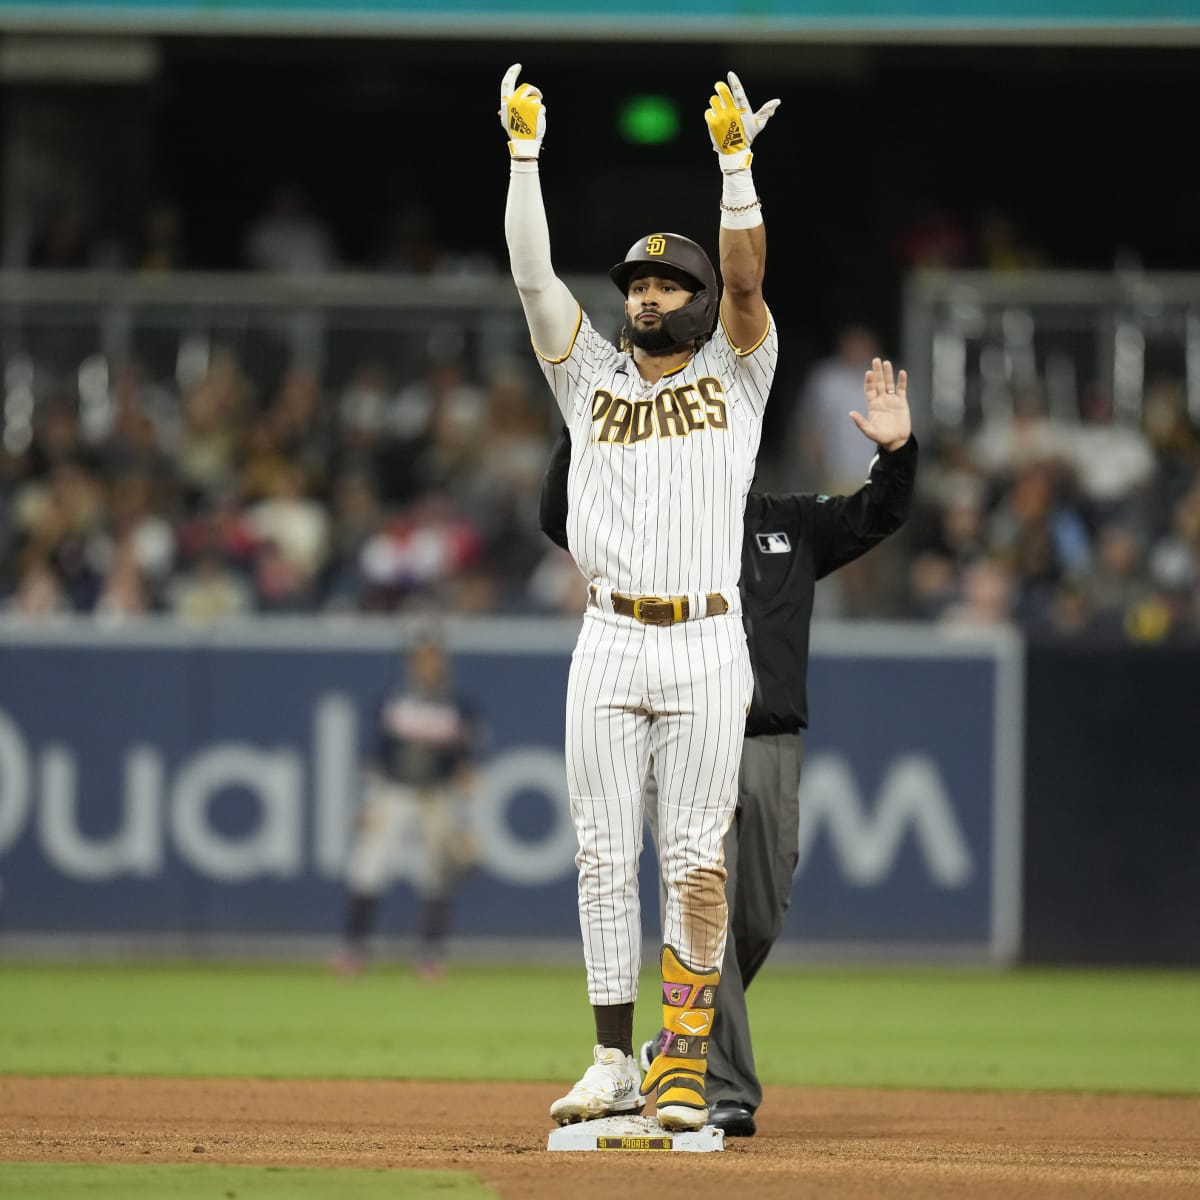 Padres Show Rest Of League They Are Ready To Win Now